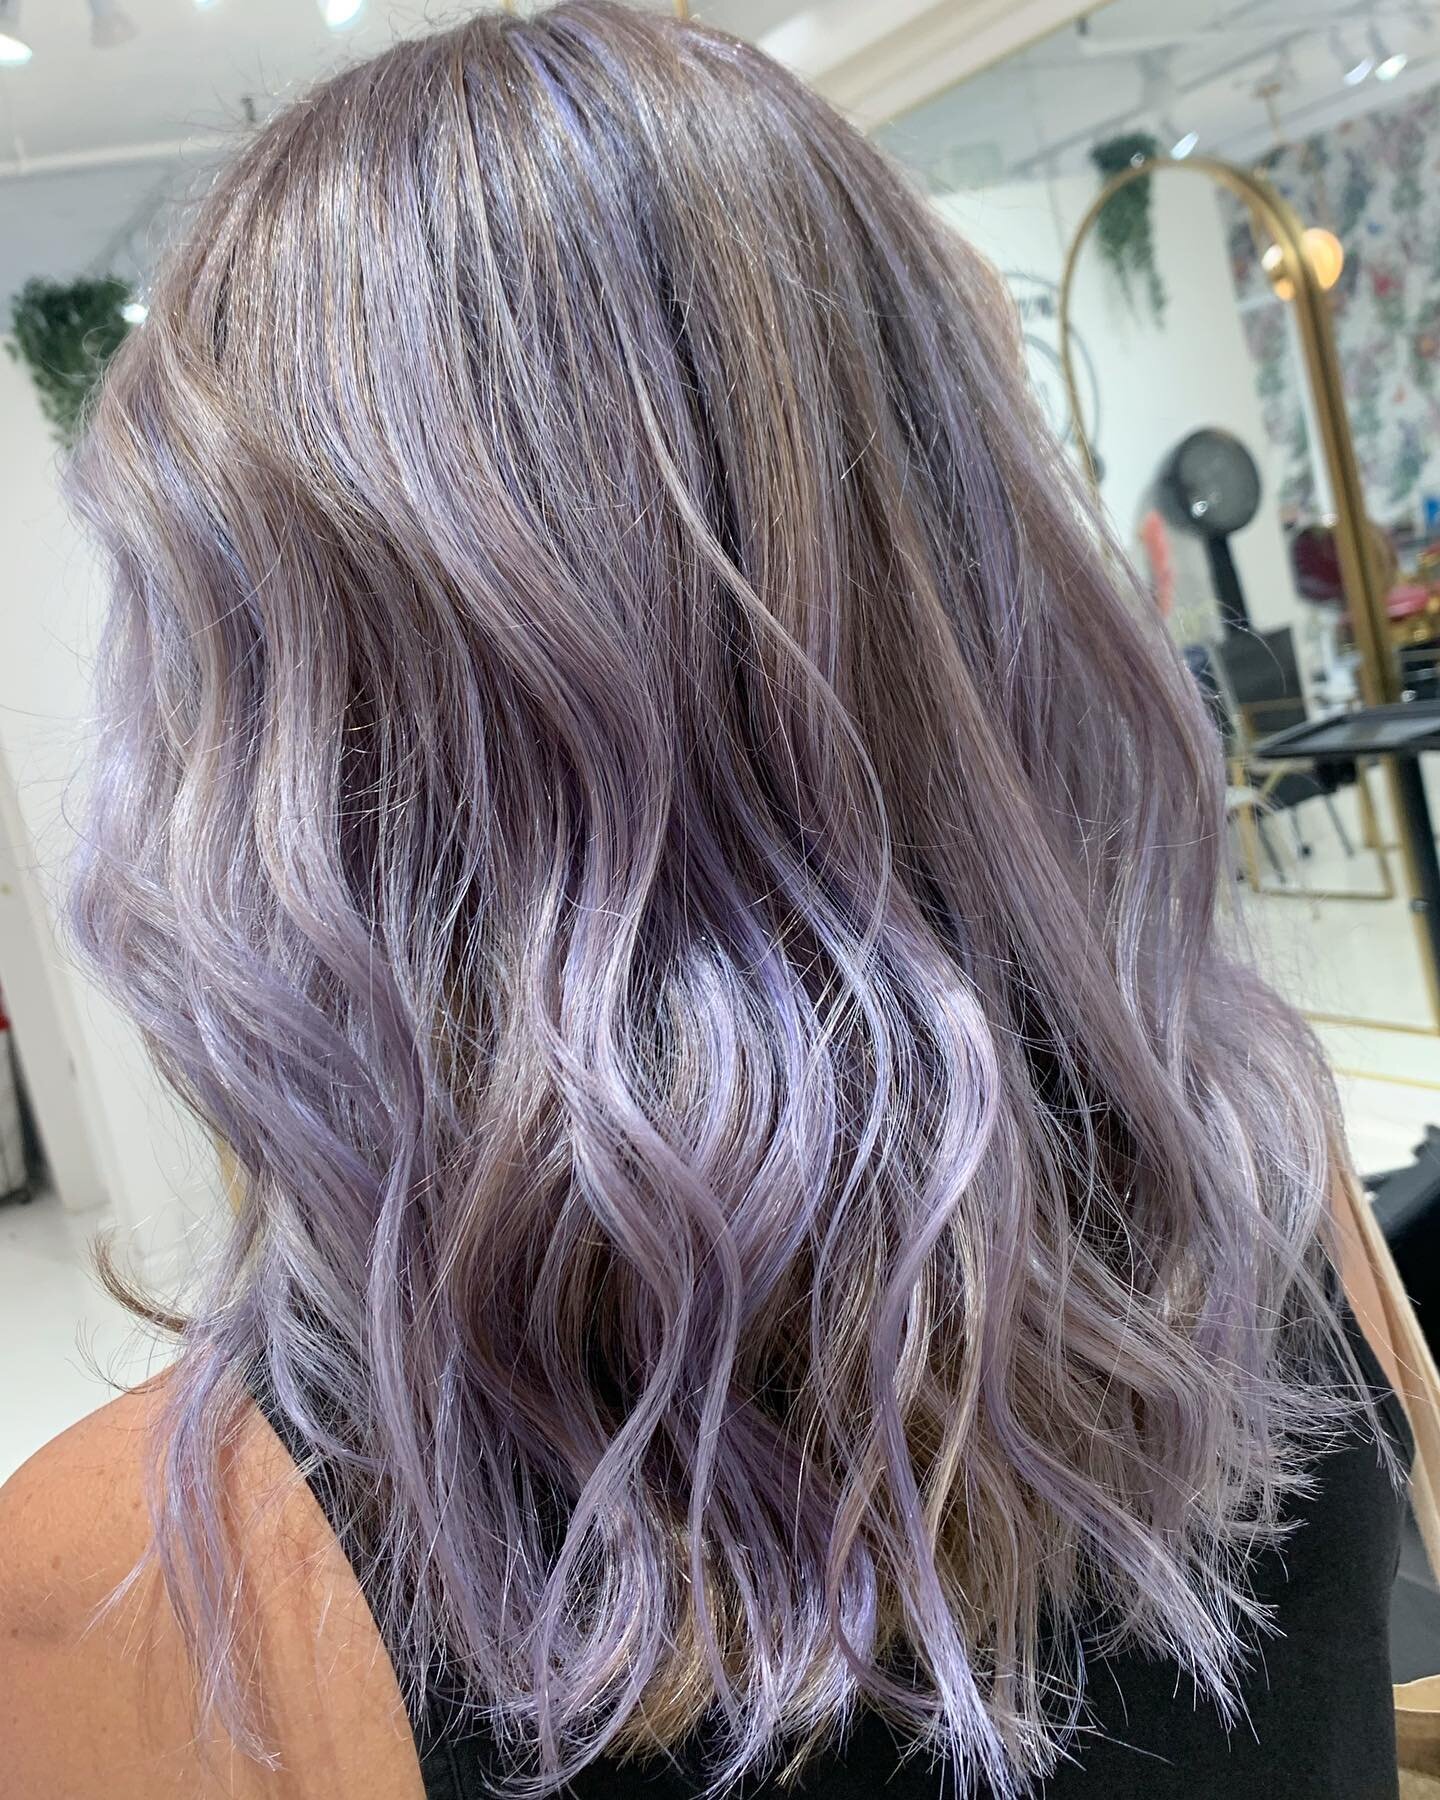 Purple haze 🔮 Lavender highlights by Gus 💜 His client came in for highlights and they decided to have some fun with it 🥳 Add a fantasy color to your next highlight appointment for a pastel pop of color @gusstylist